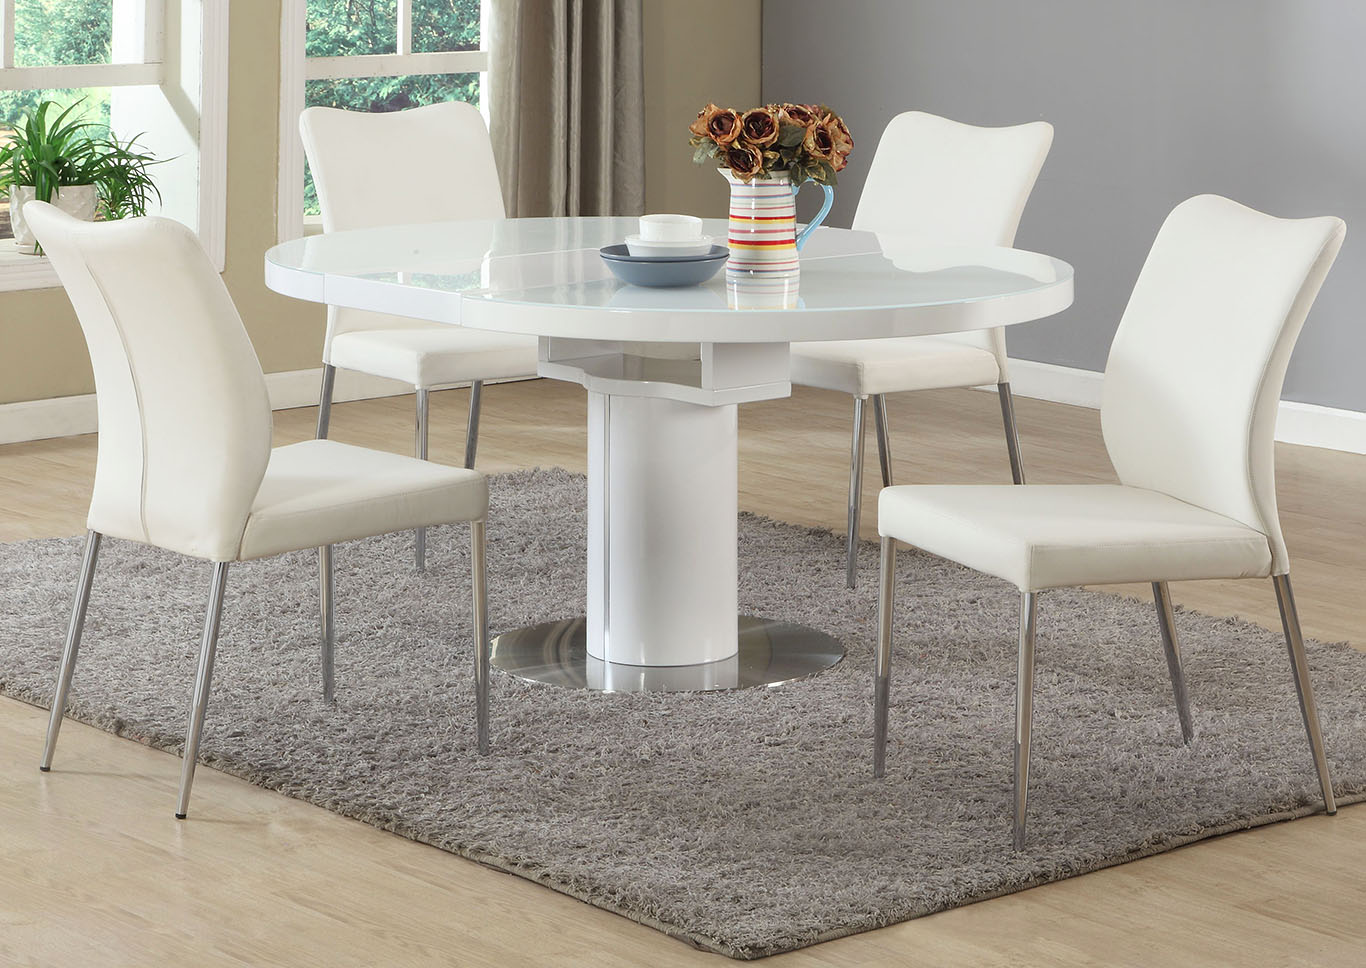 Nora White Dining Table w/4 Side Chairs,Chintaly Imports